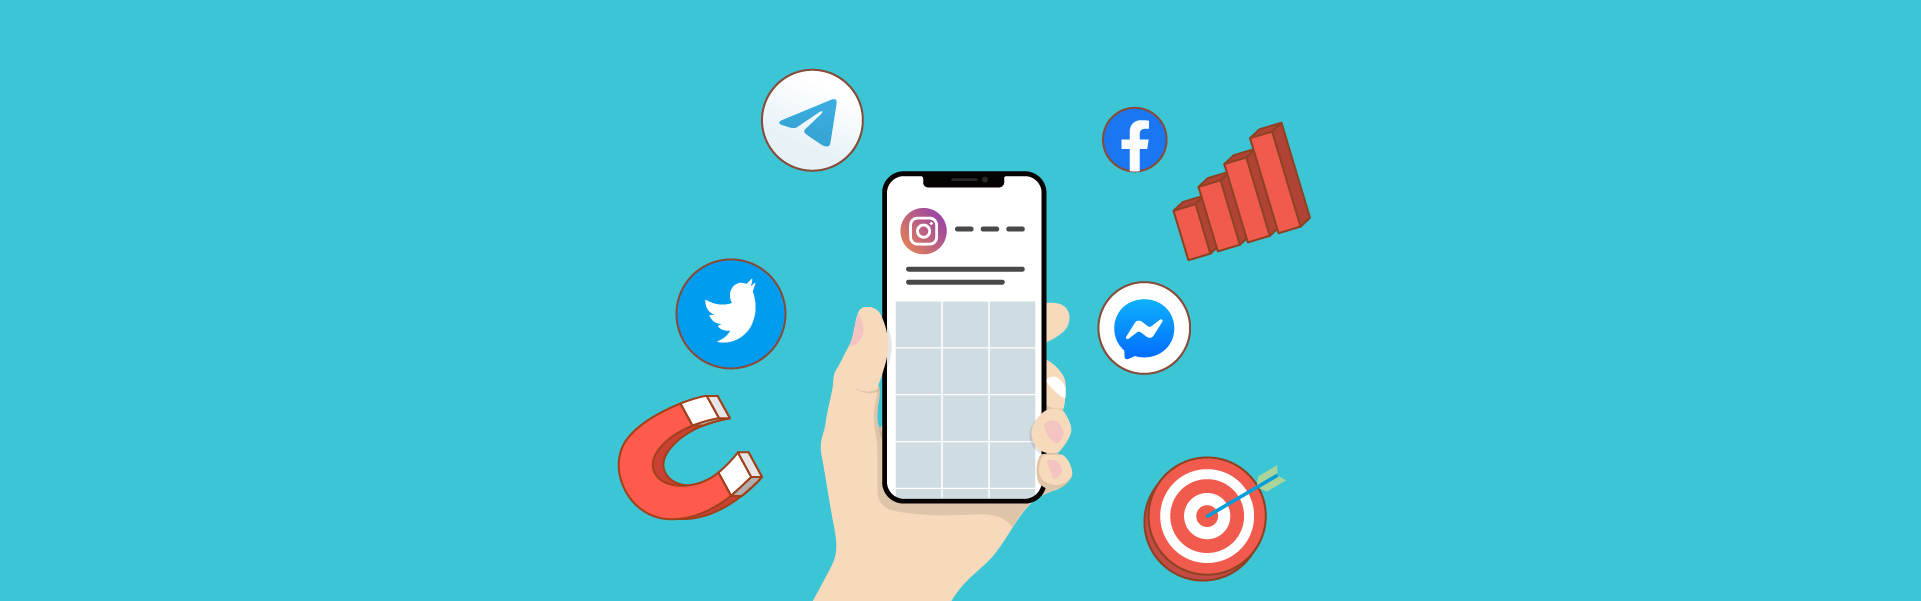 Top 6 Creative Trends for Social Media Marketing in 2021